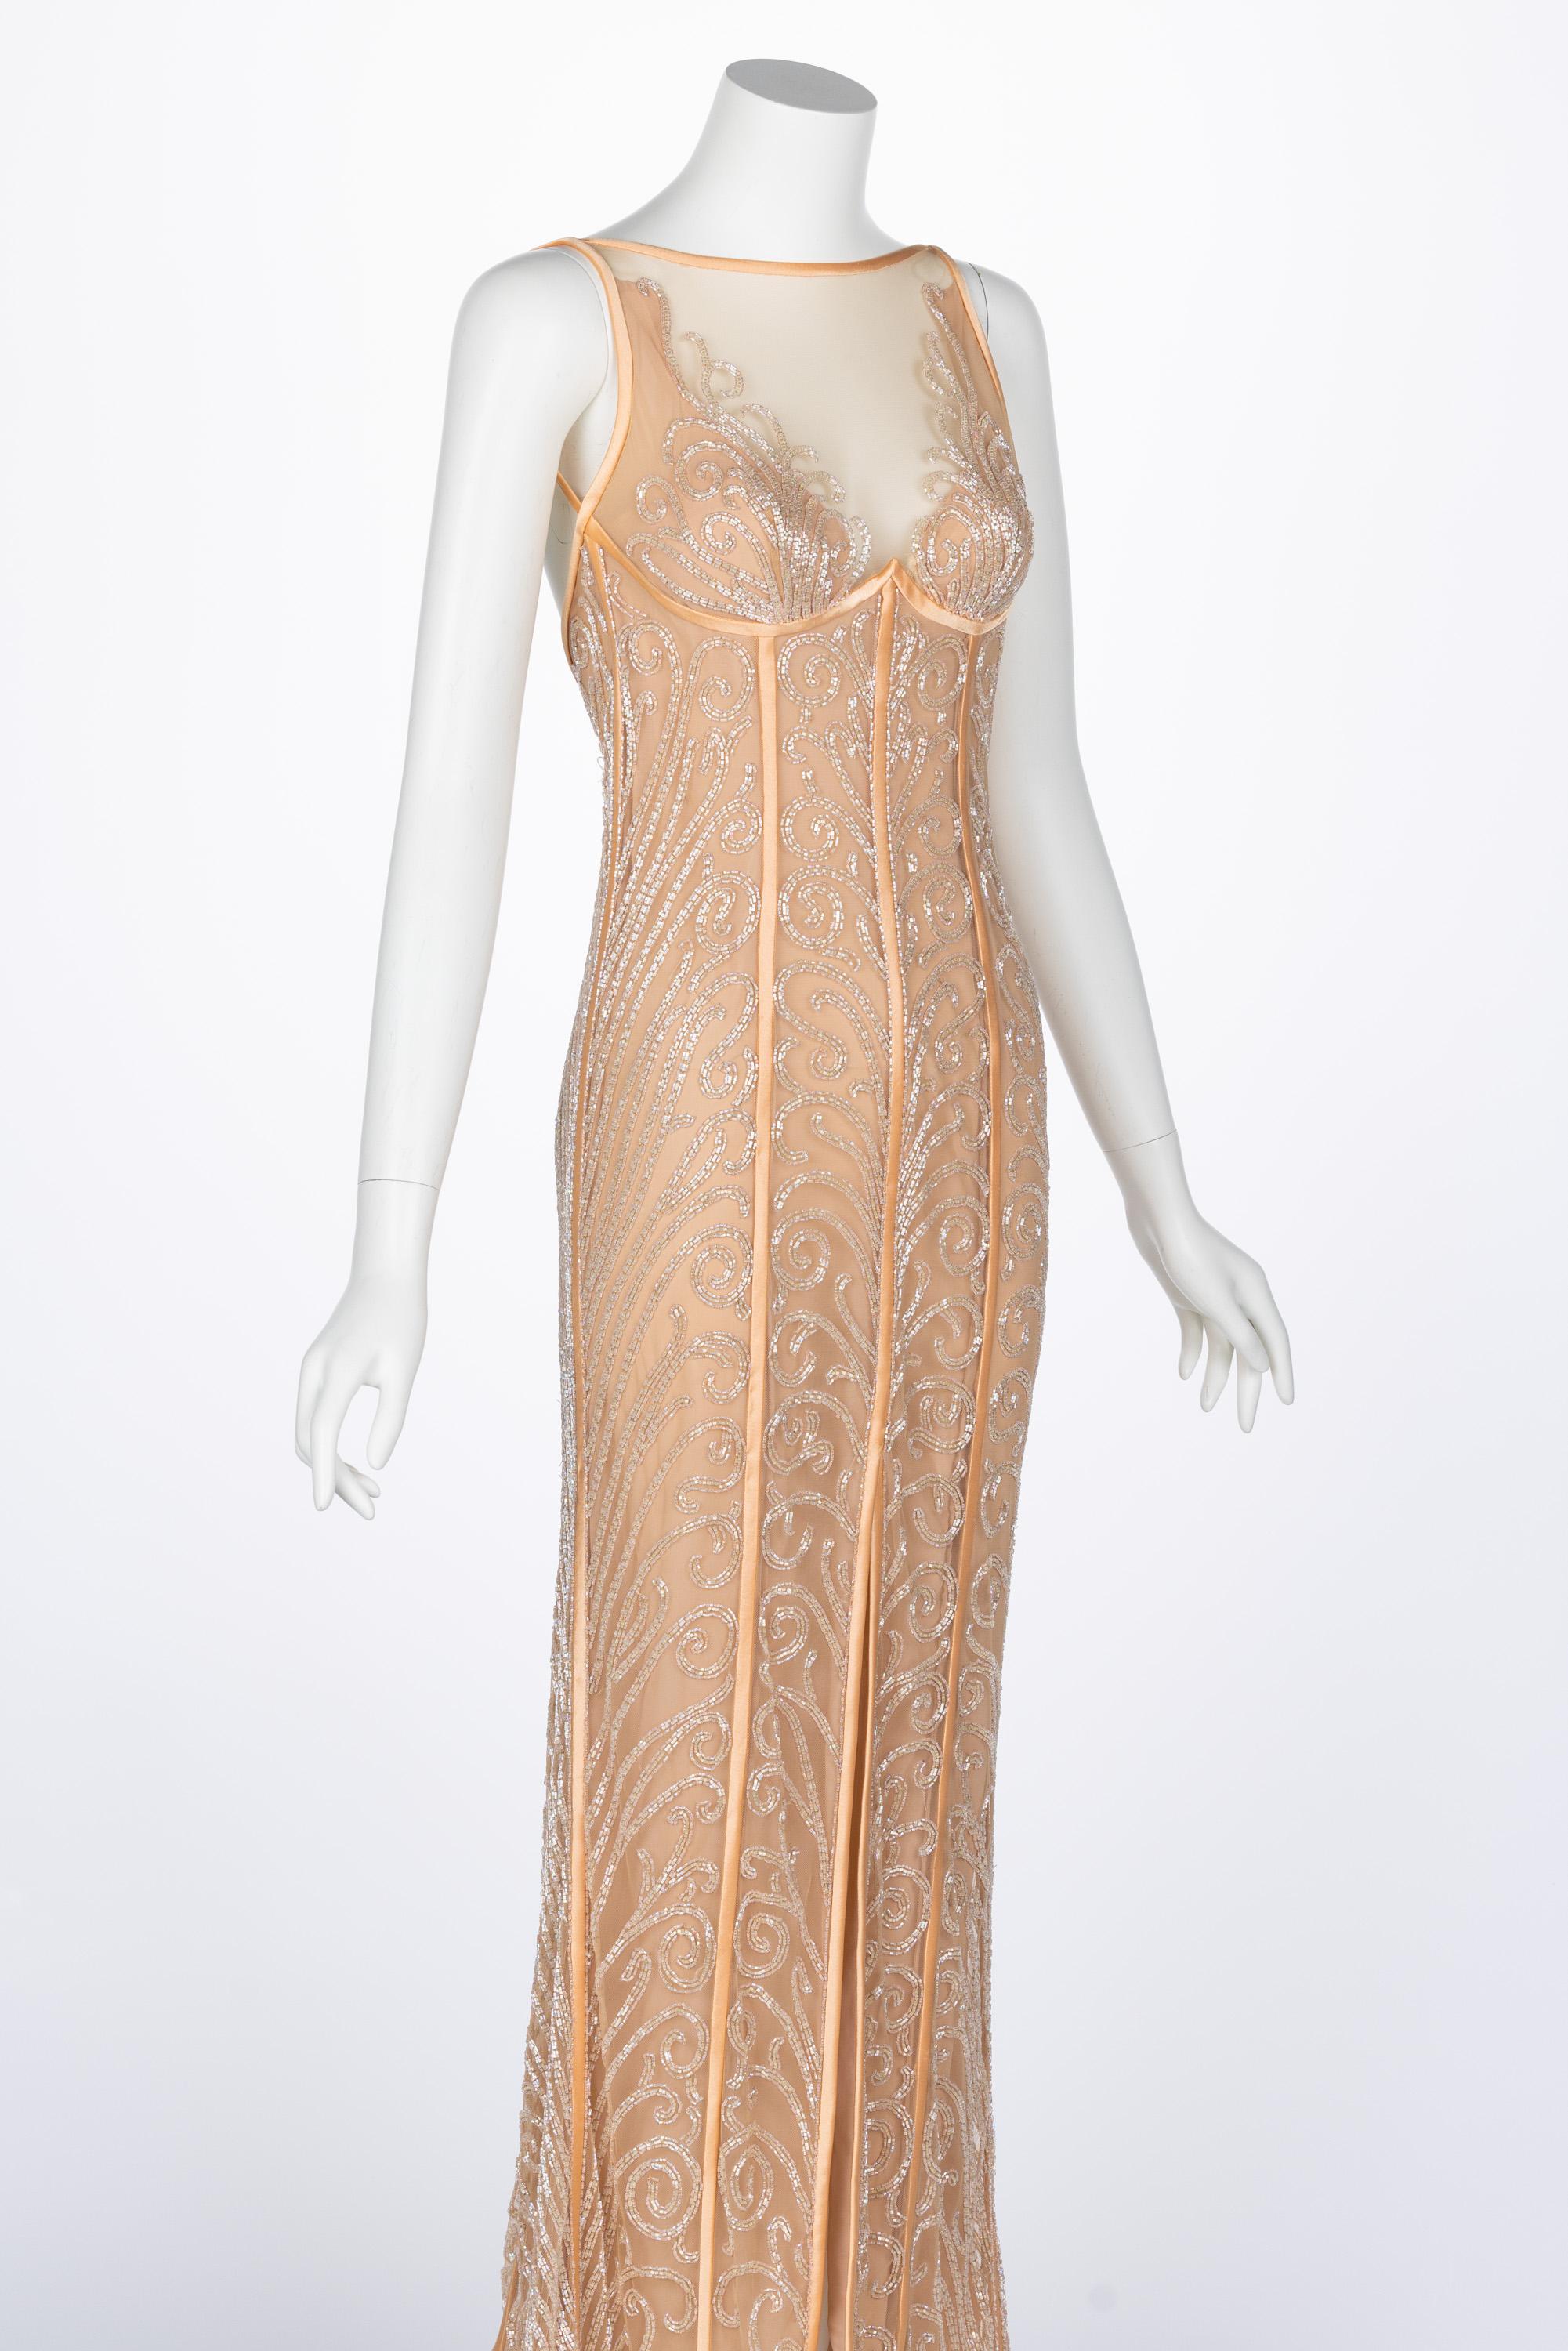  Bob Mackie Extraordinary 1990s Art Deco Beaded Gown In Excellent Condition For Sale In Boca Raton, FL